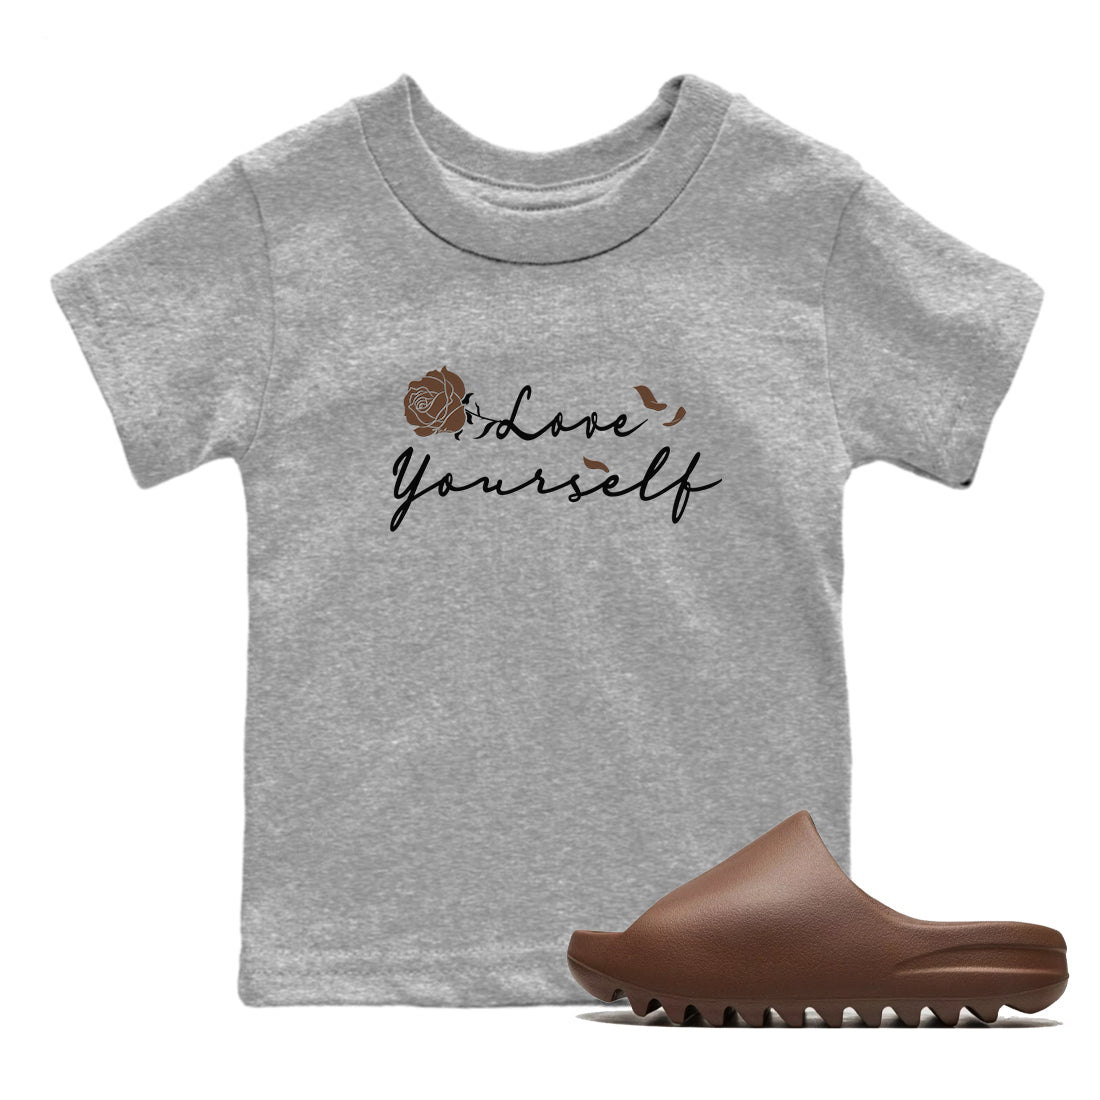 Yeezy Slide Flax shirts to match jordans Love Yourself sneaker match tees Yeezy Slide Flax SNRT Sneaker Tees streetwear brand Baby and Youth Heather Grey 1 cotton tee